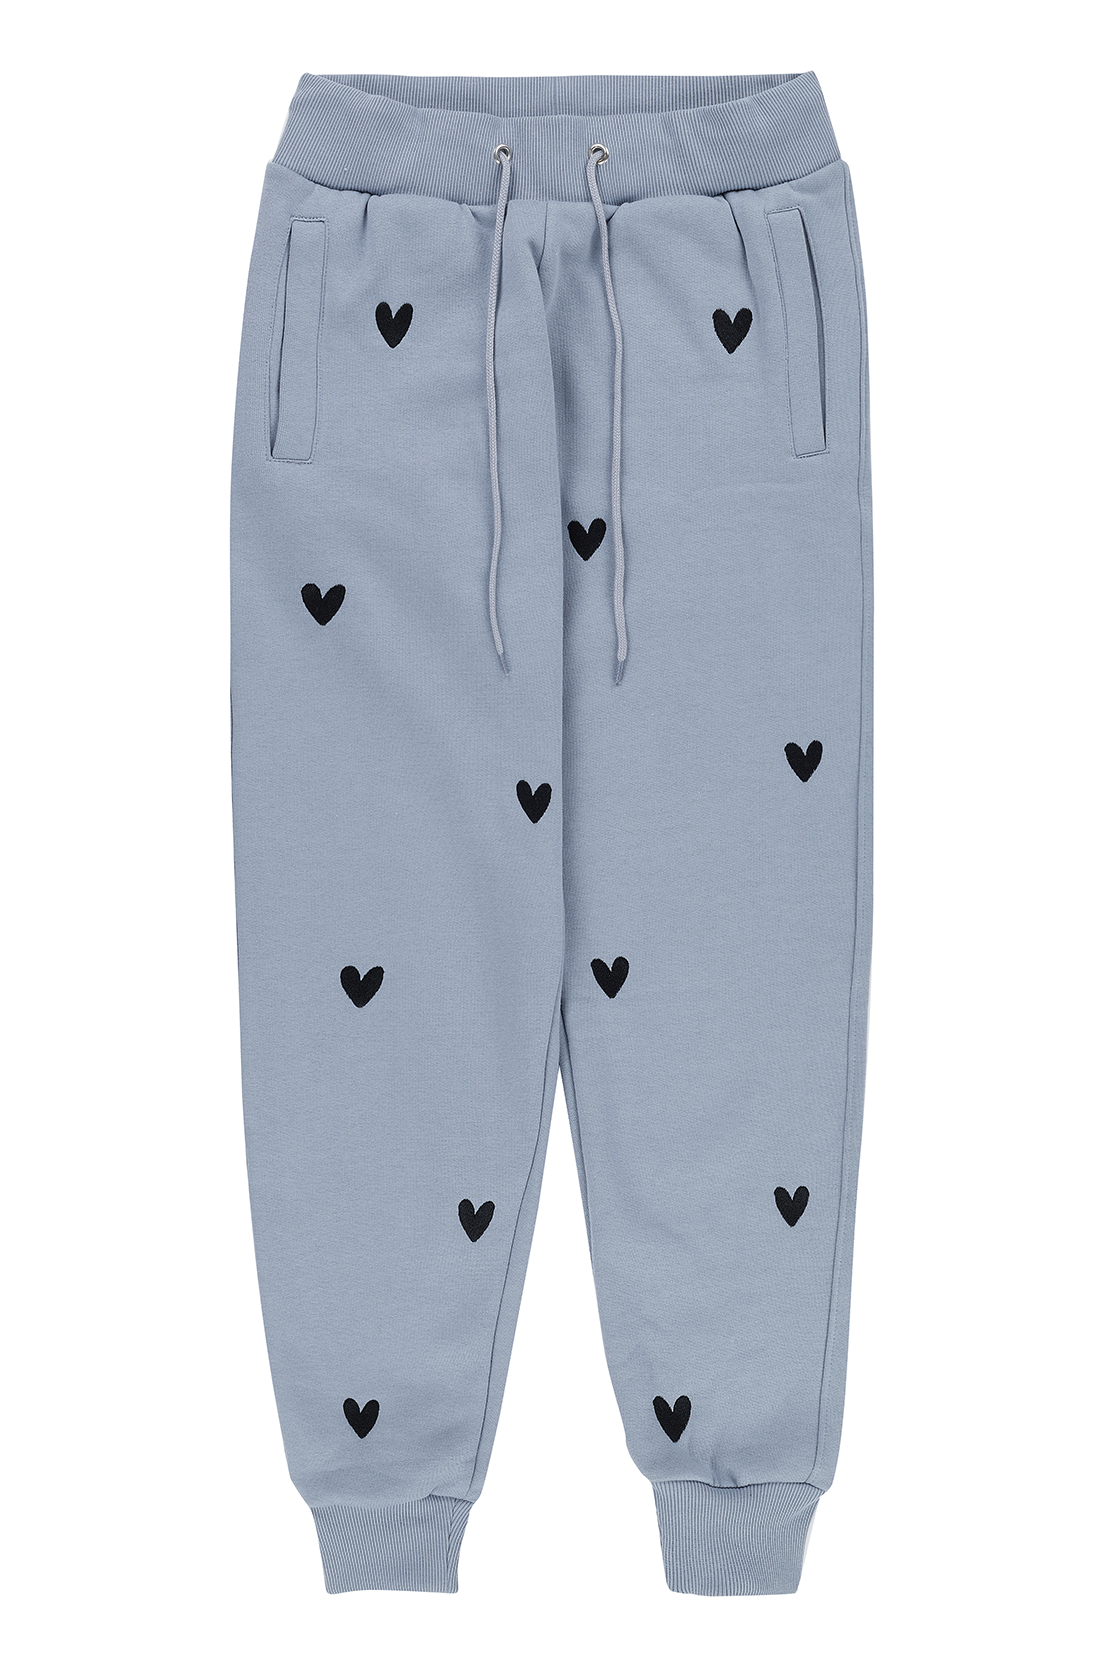 O&F Heart Embroidered Joggers - Blue/Grey